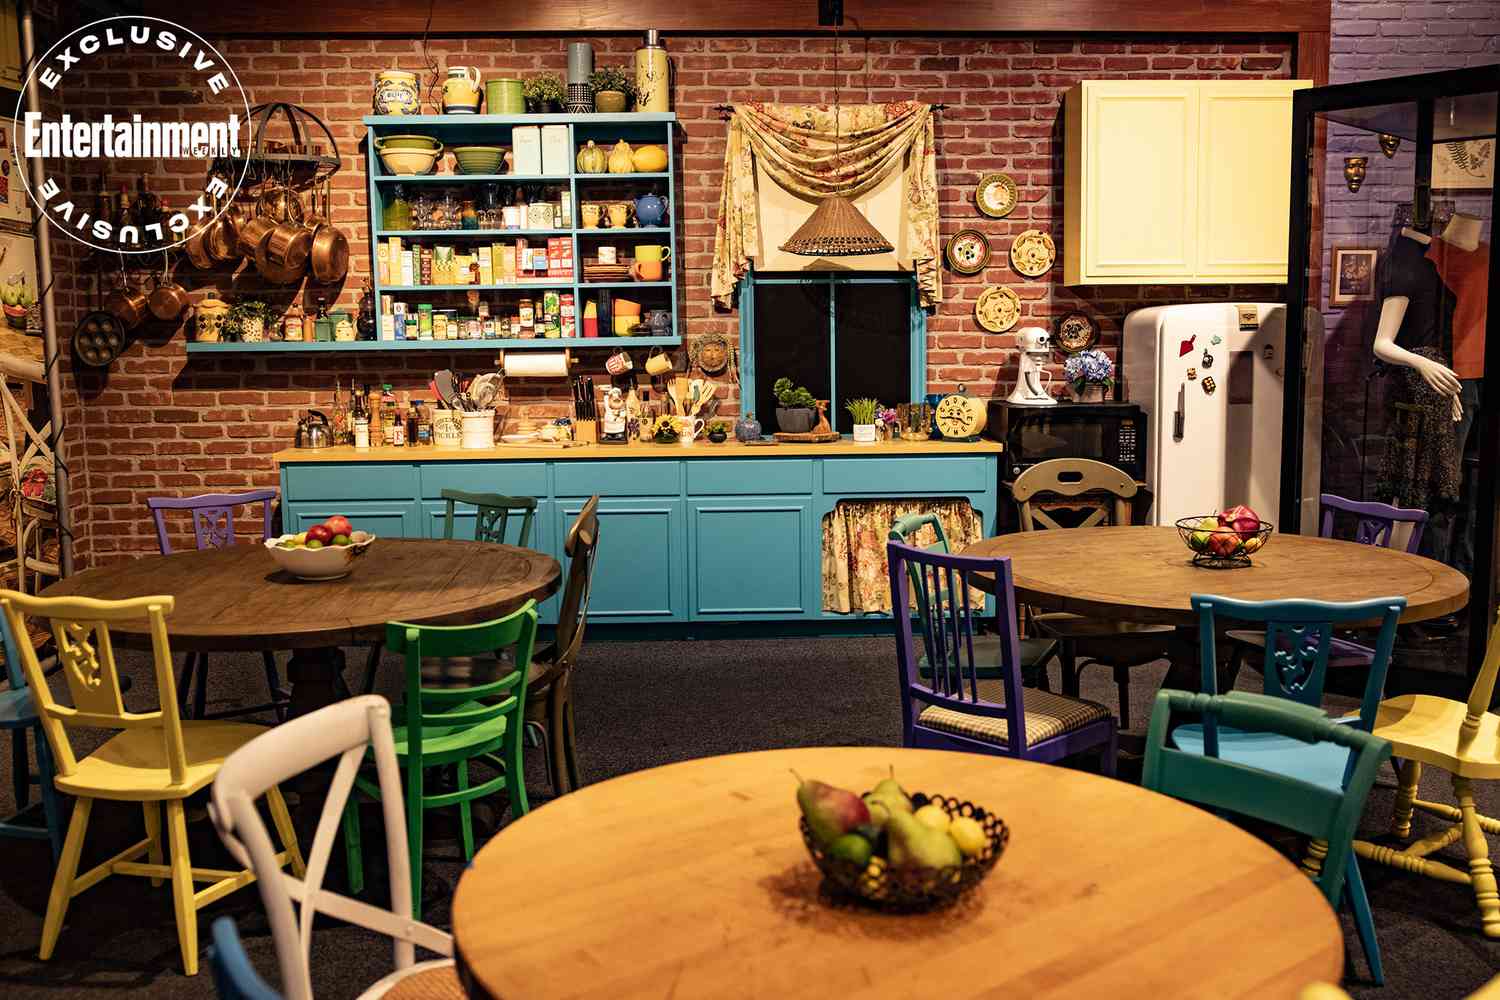 Warner Bros. tour expands Central Perk from Friends